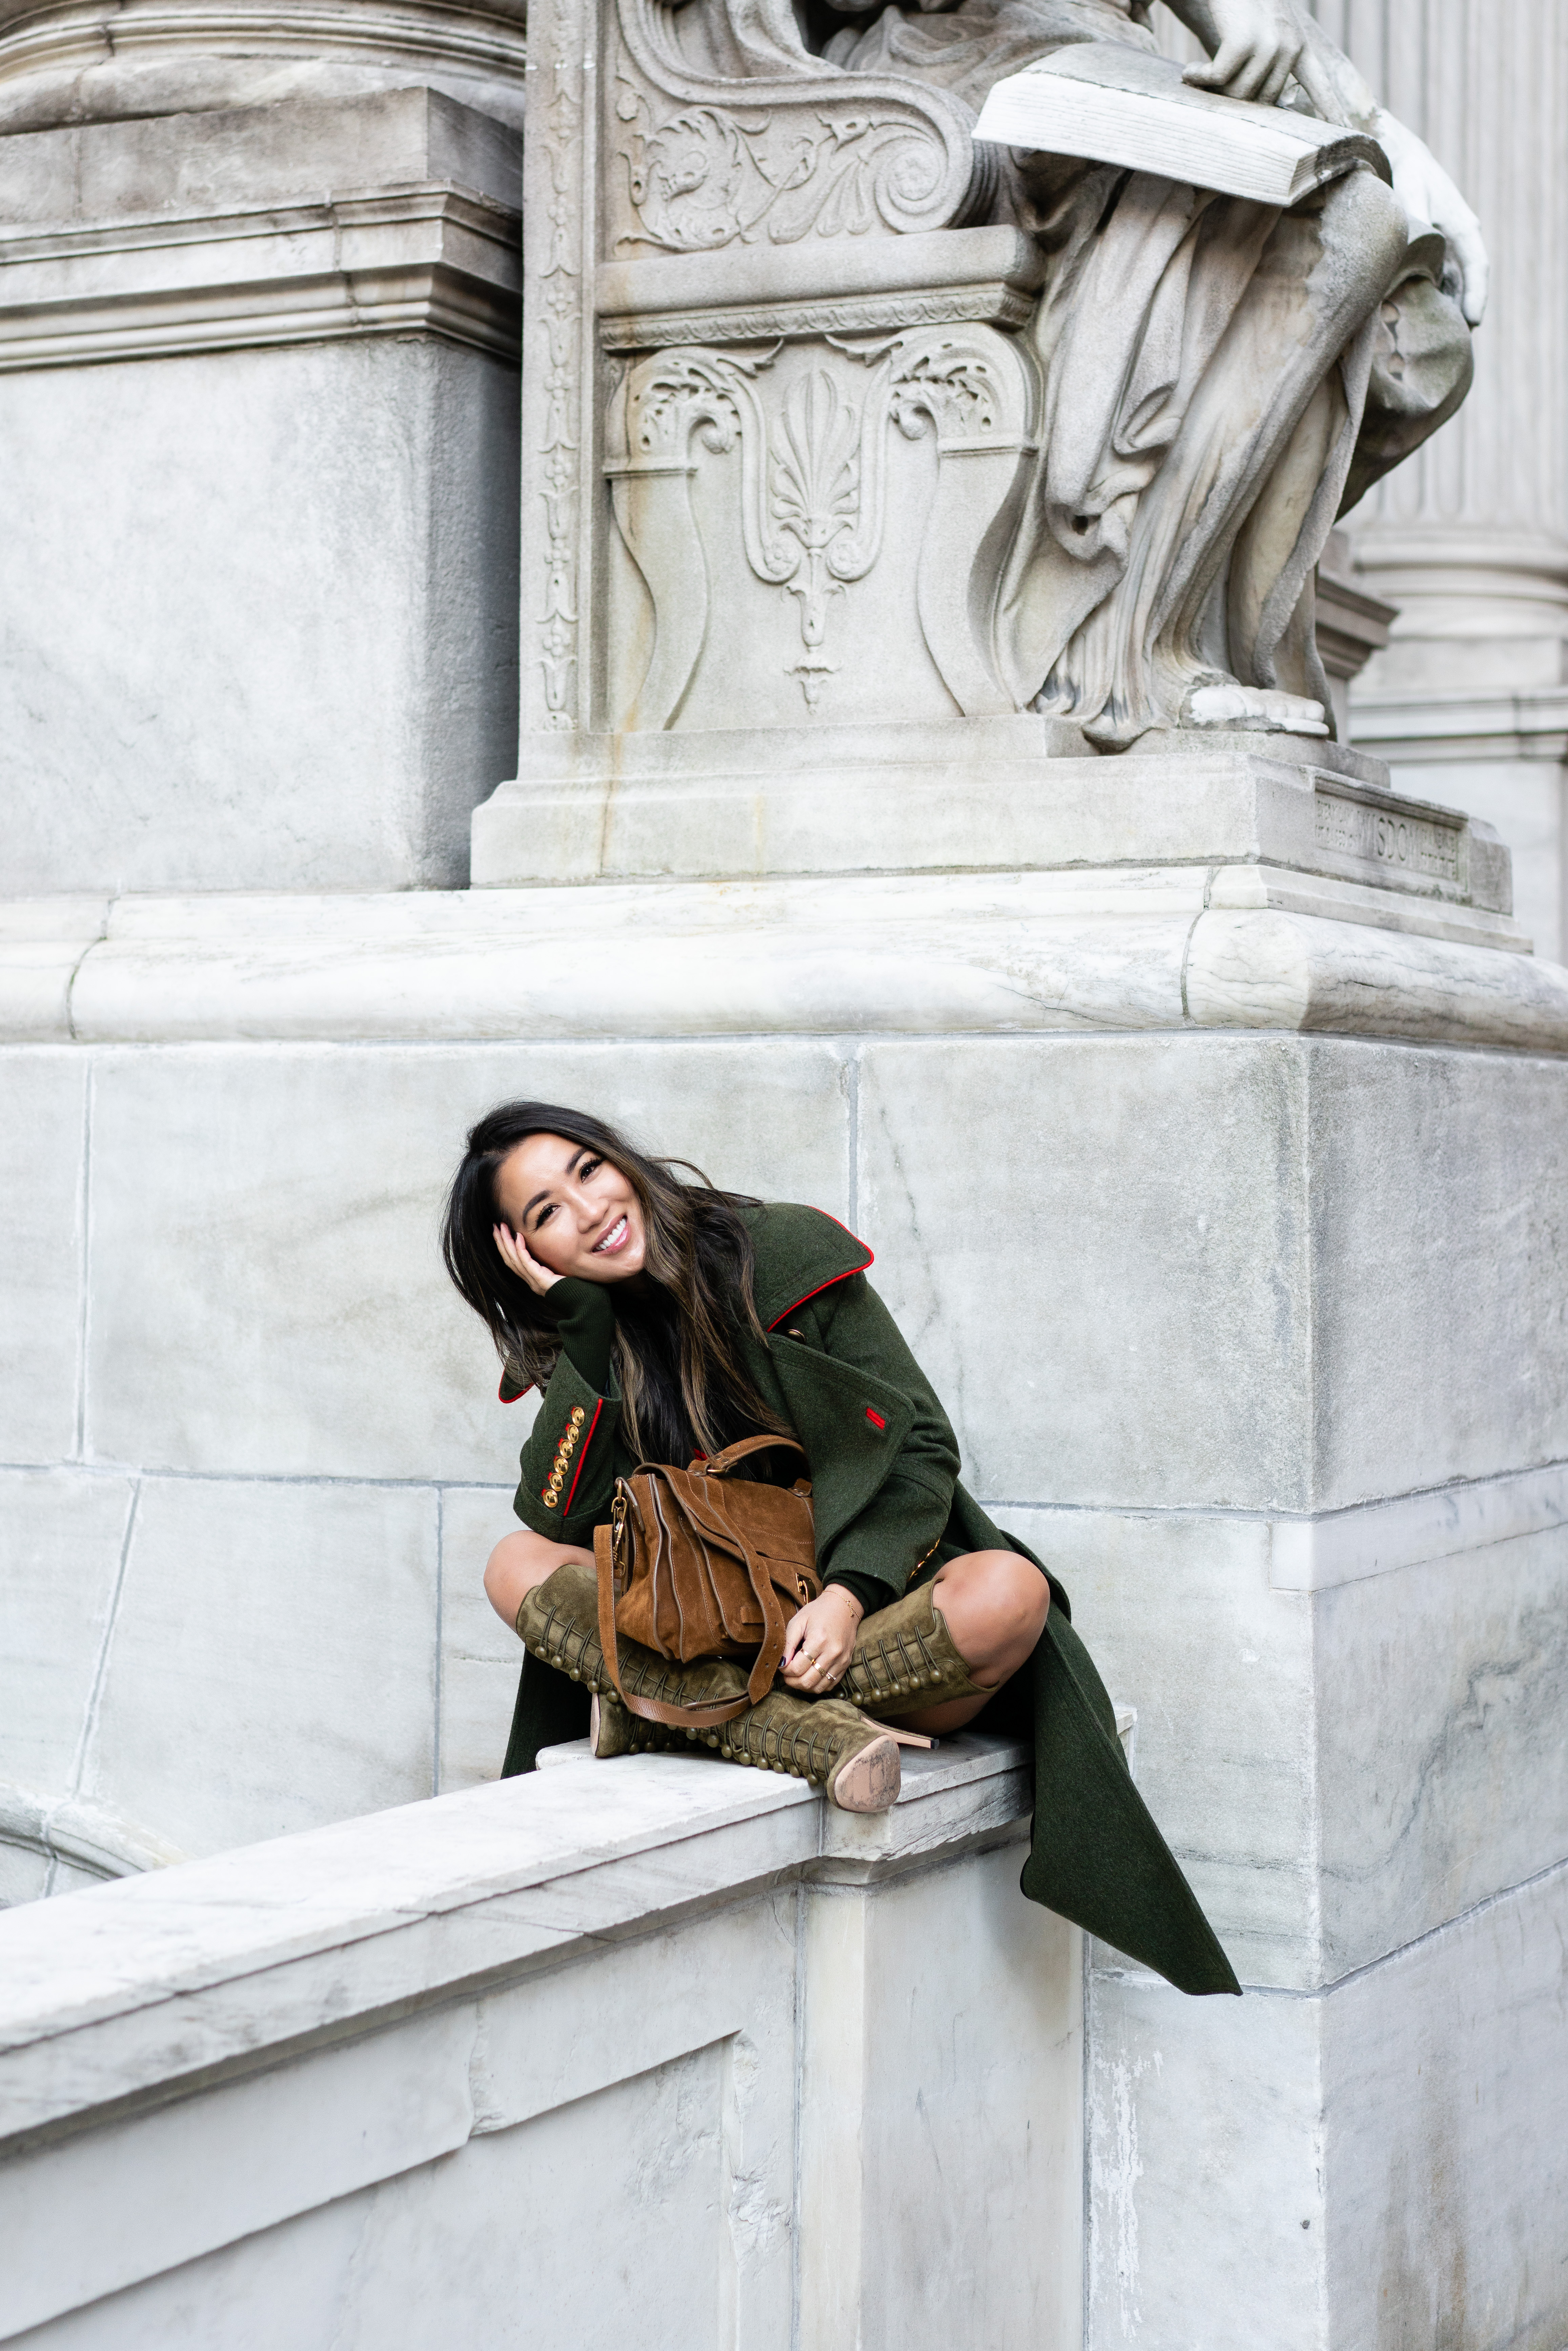 Burberry green military coat with gianvito rossi suede boots and proenza schouler ps1 brown bag